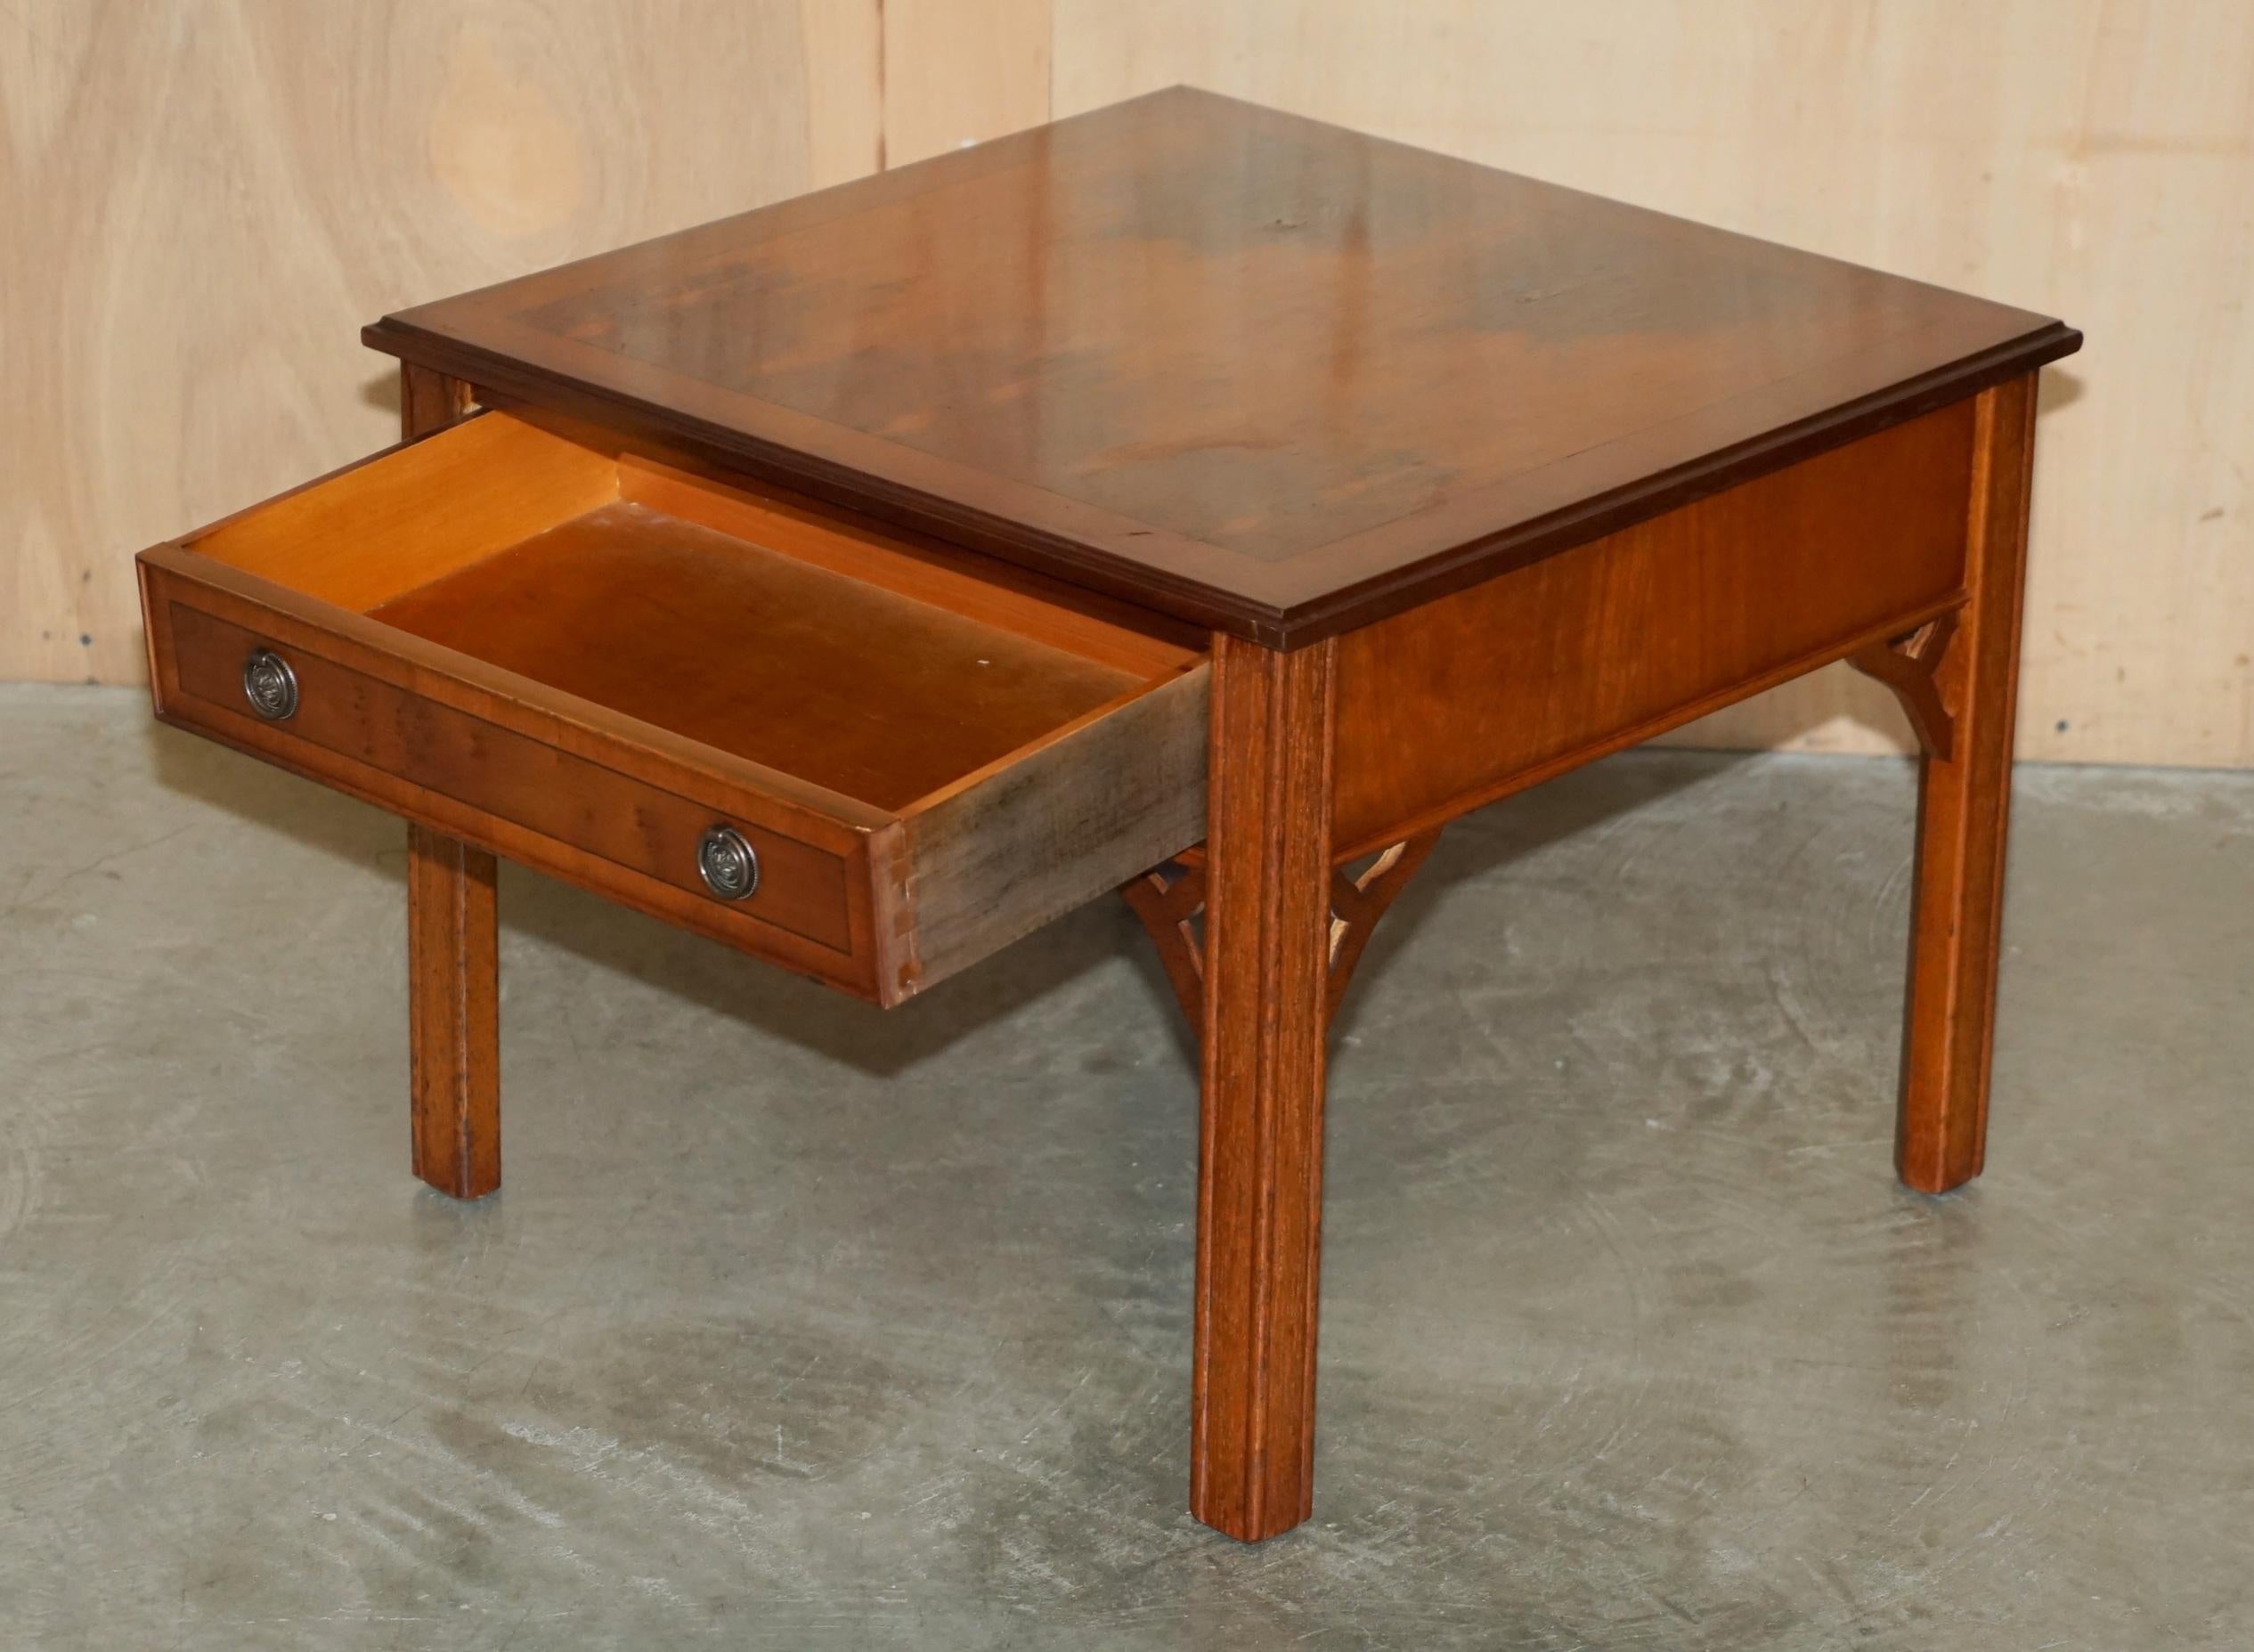 LOVELY PAIR OF BURR YEW WOOD SiDE END LAMP WINE TABLES WITH LARGE SINGLE DRAWERS For Sale 5